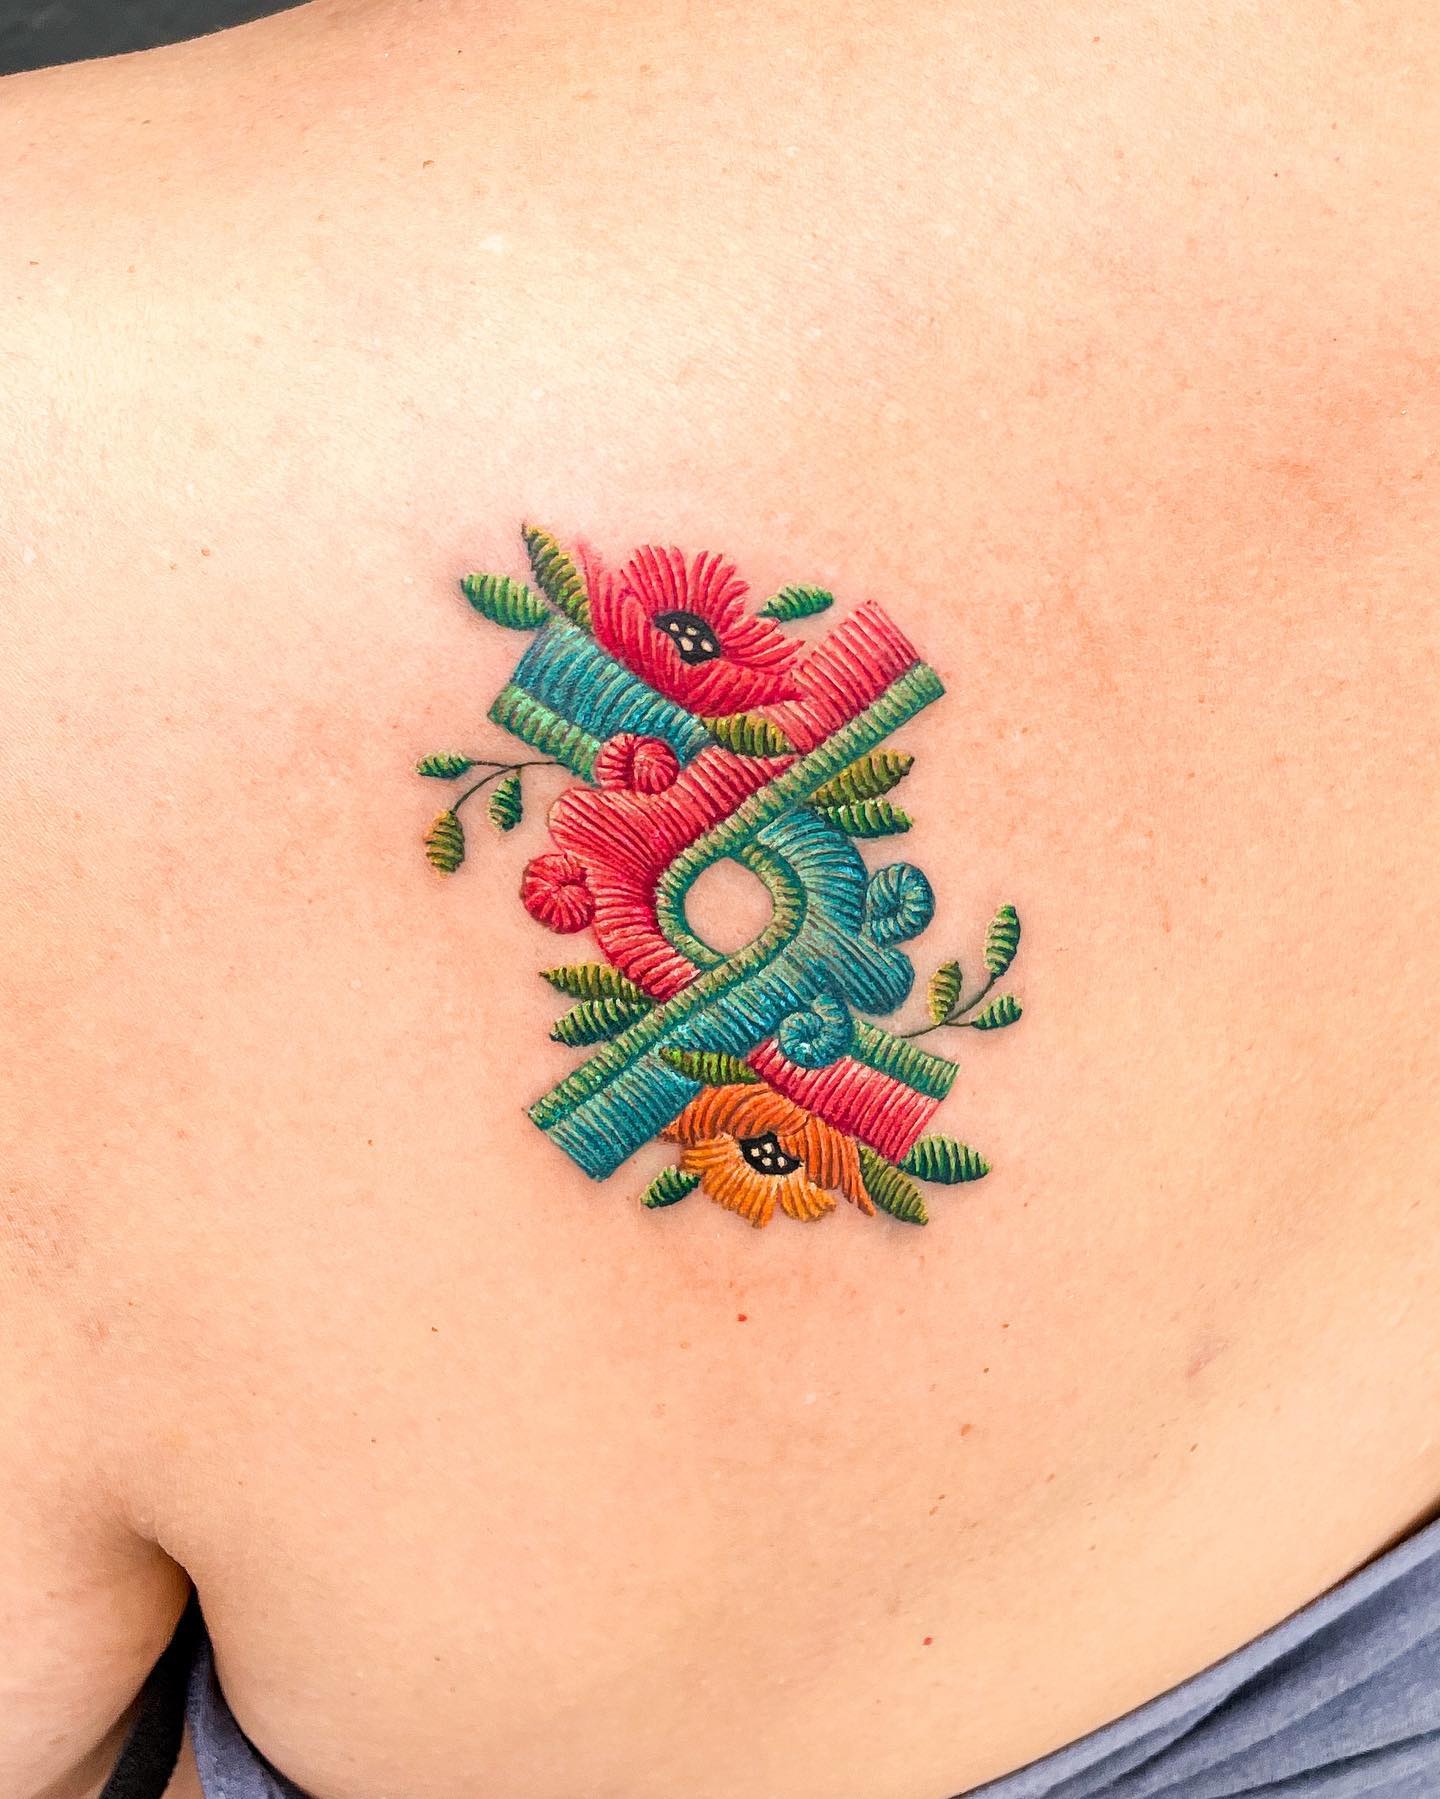 Abstract symbol embroidery tattoo